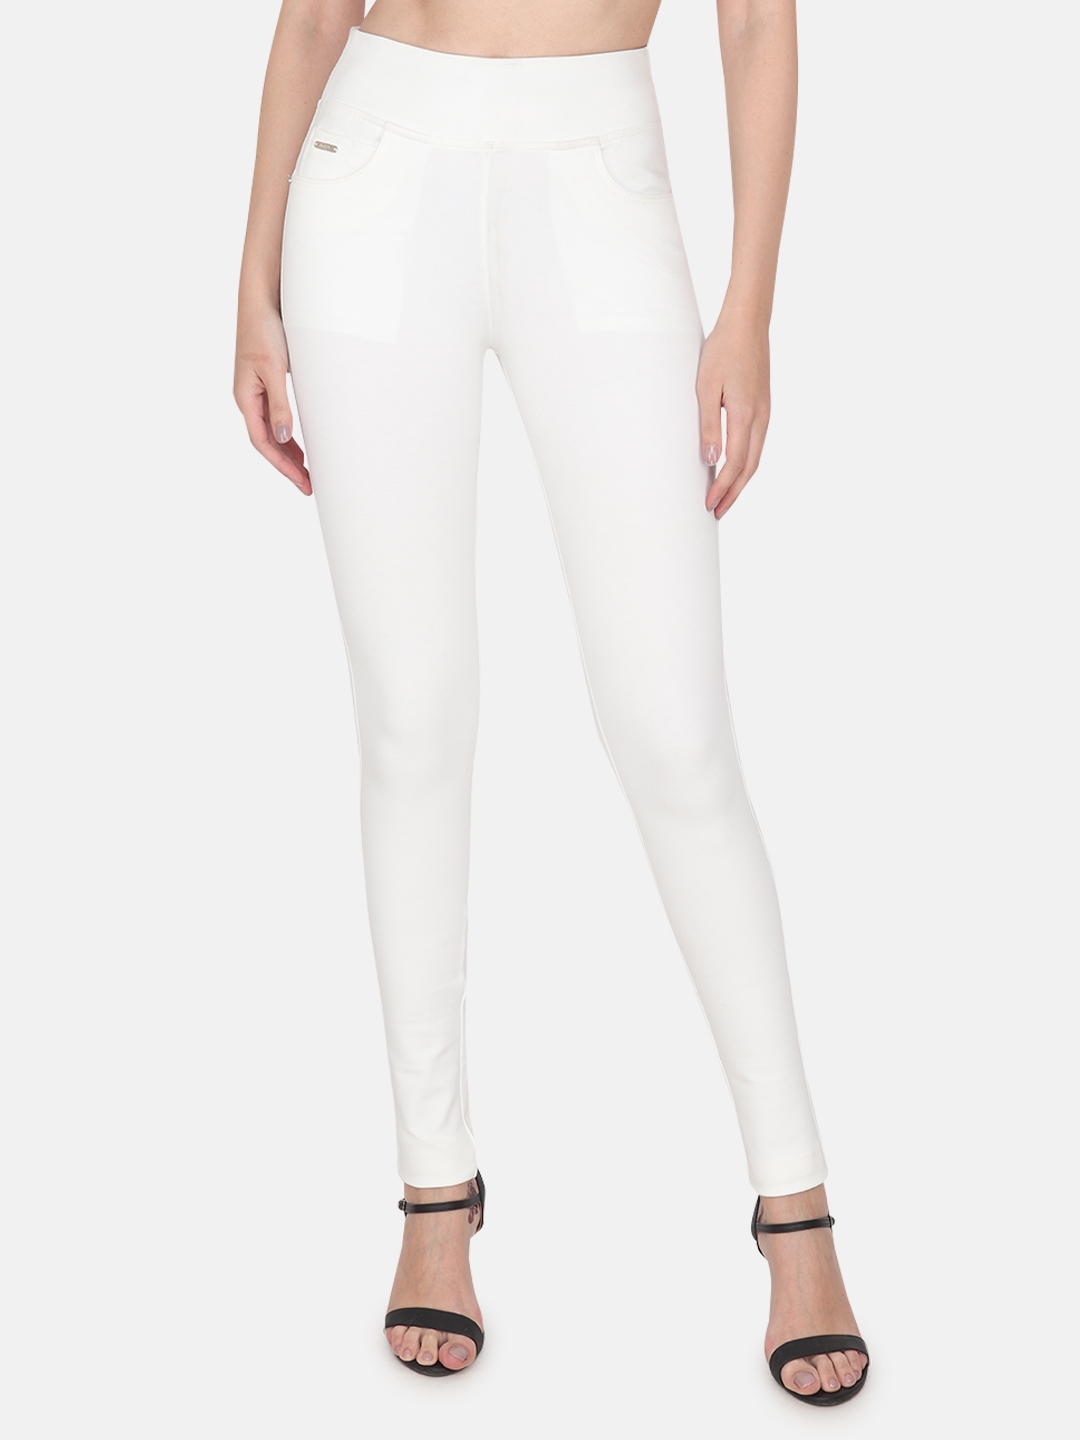 Albion By CnM White Women's Jeggings